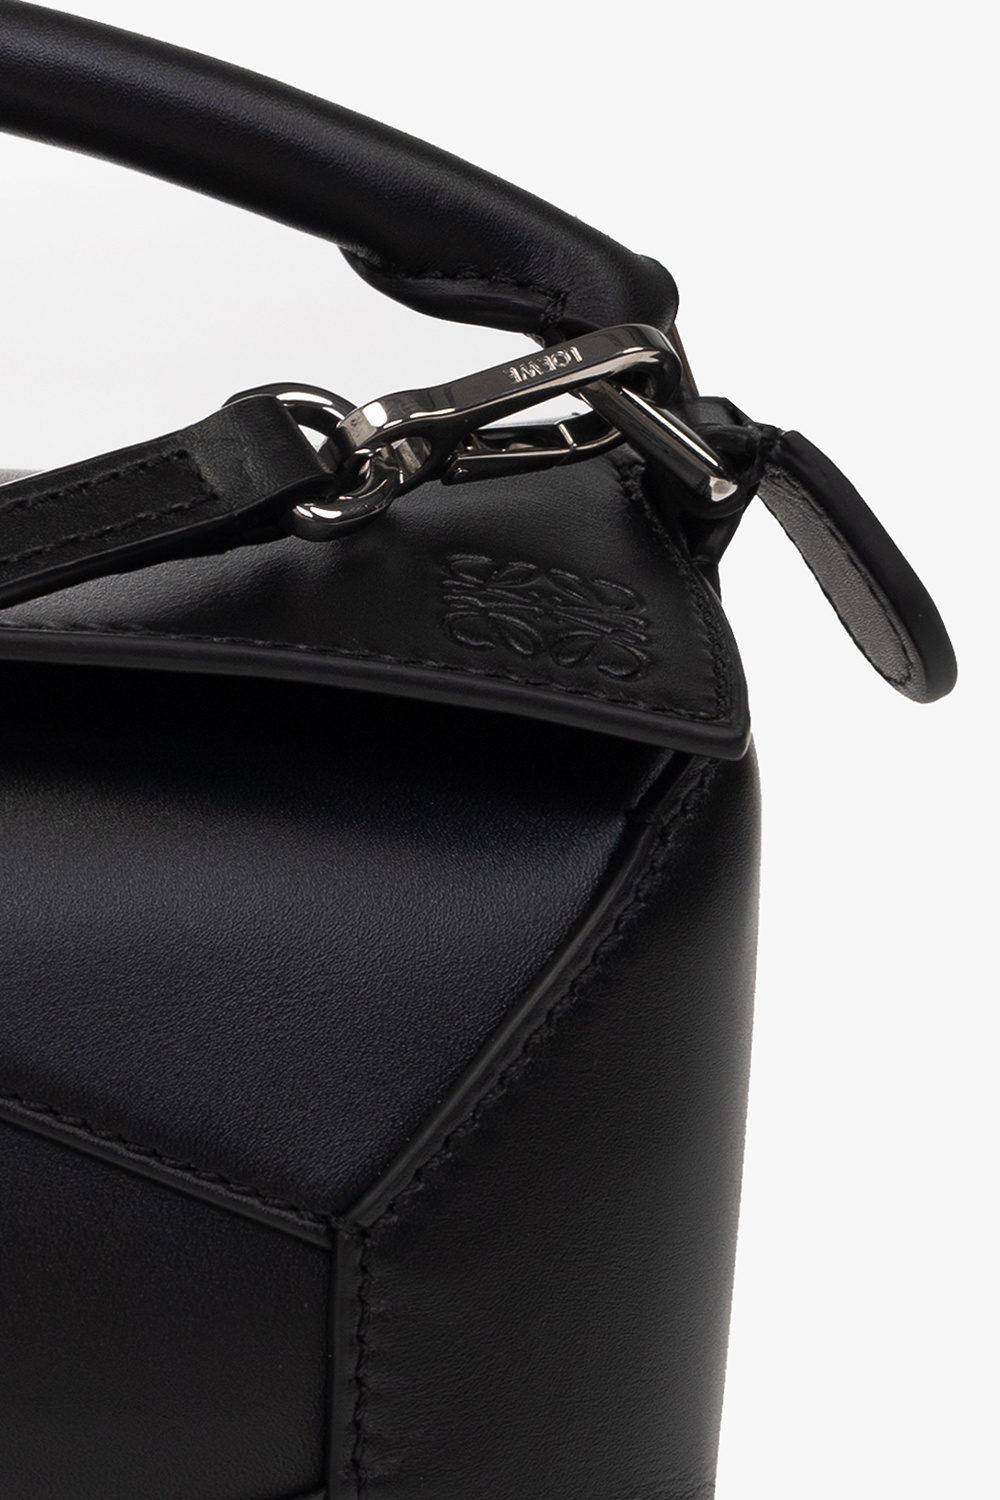 LOEWE Puzzle Small Smooth Leather Bag in Black